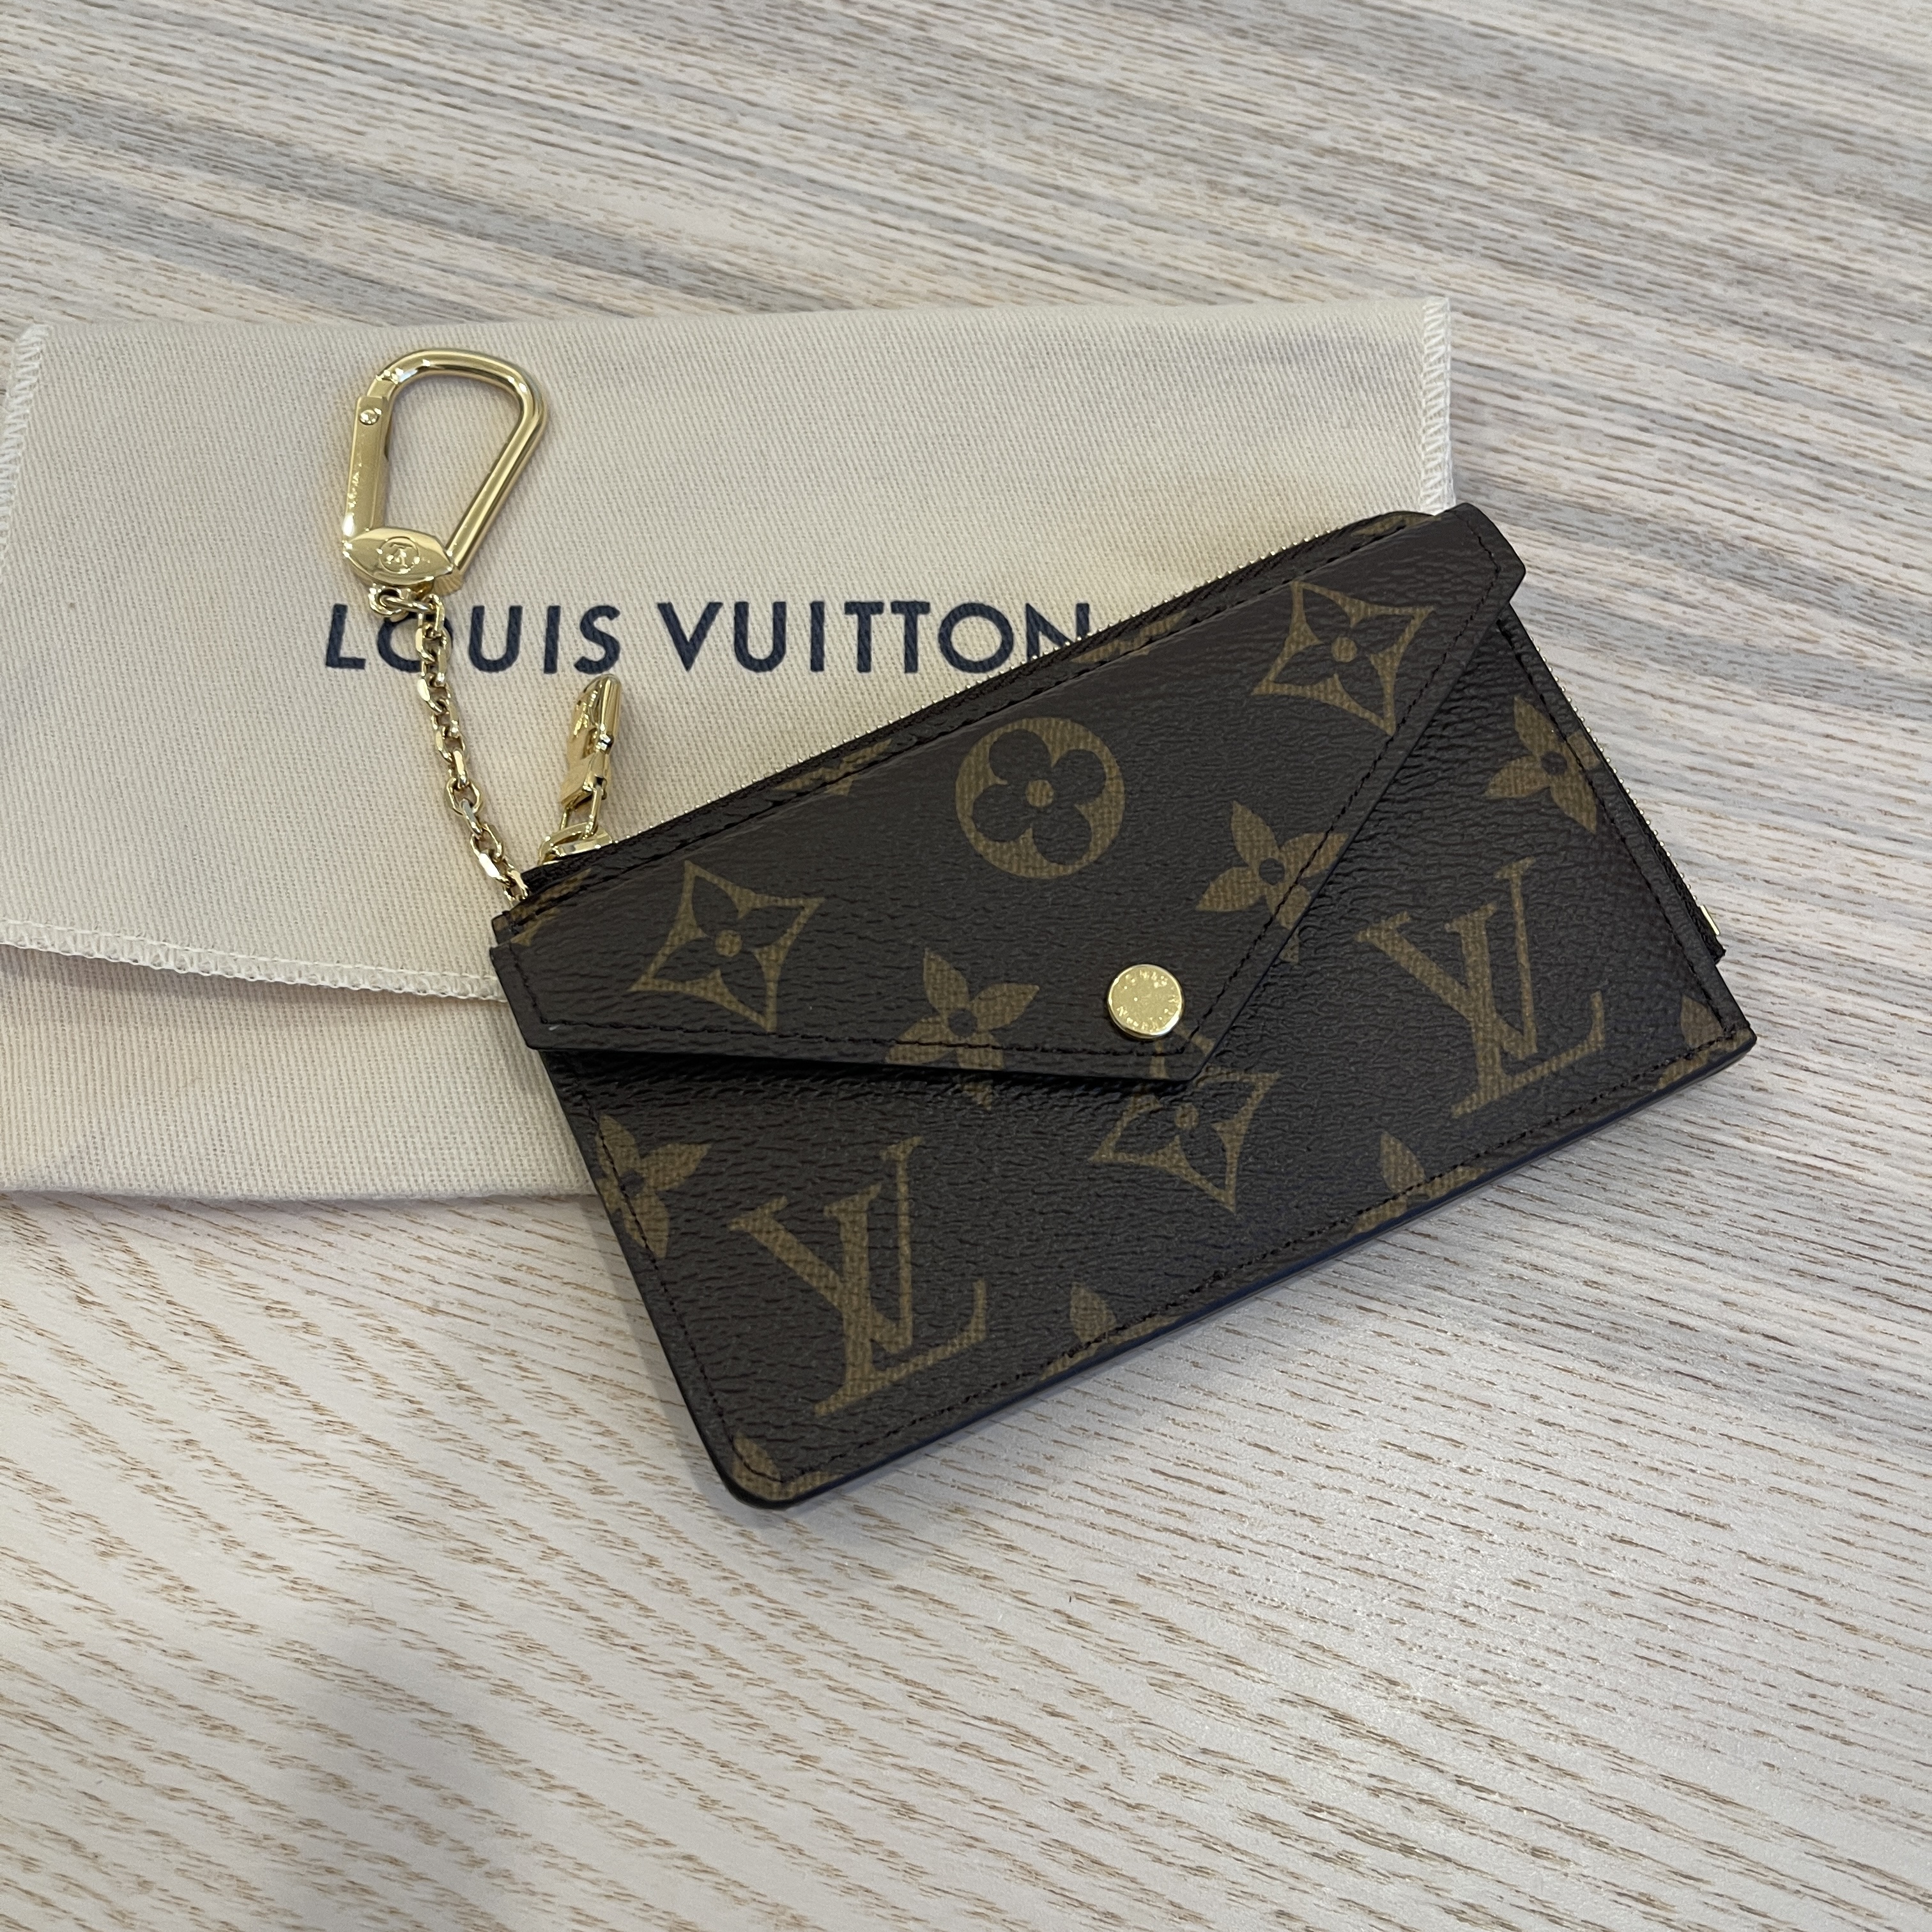 NEW AUTHENTIC LOUIS VUITTON CARD HOLDER RECTO VERSO WALLET